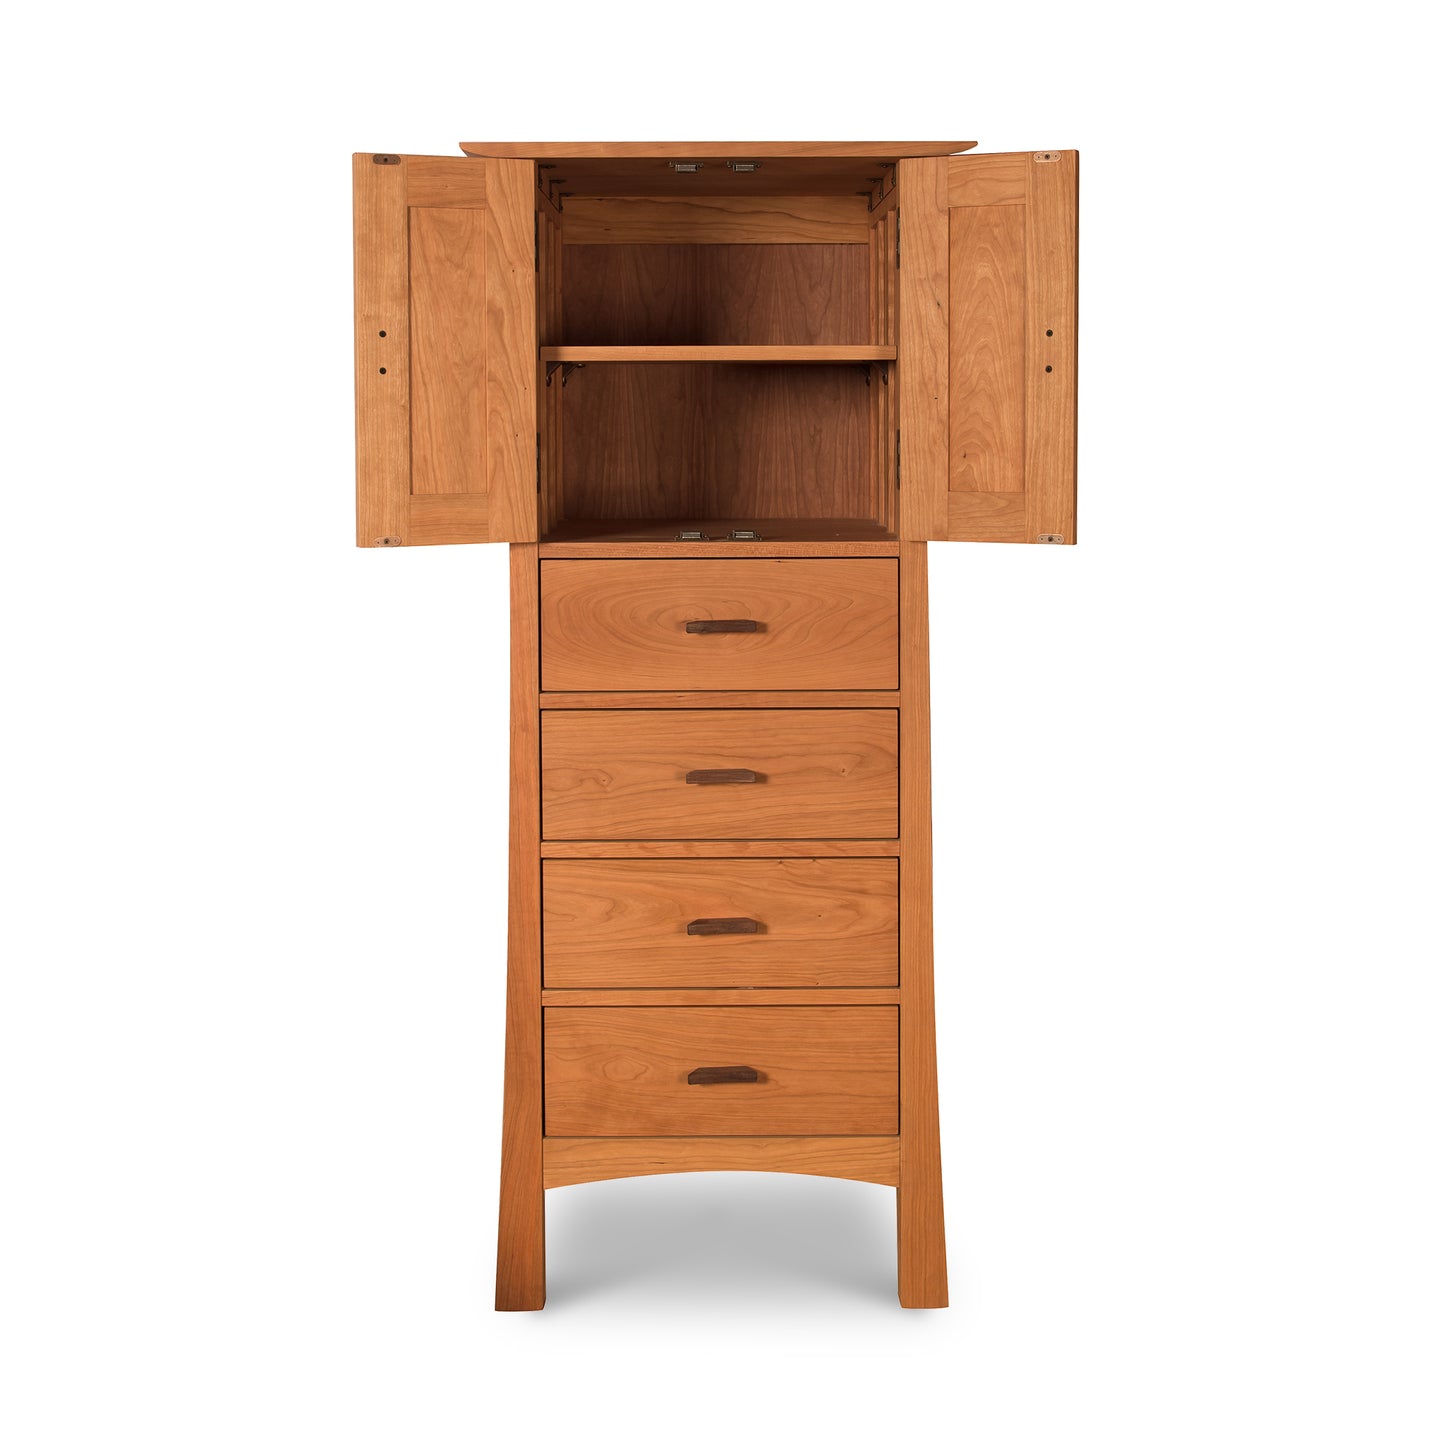 A Vermont Furniture Designs Contemporary Craftsman Tall Storage Chest with two drawers and a door, providing a modern bedroom storage solution.